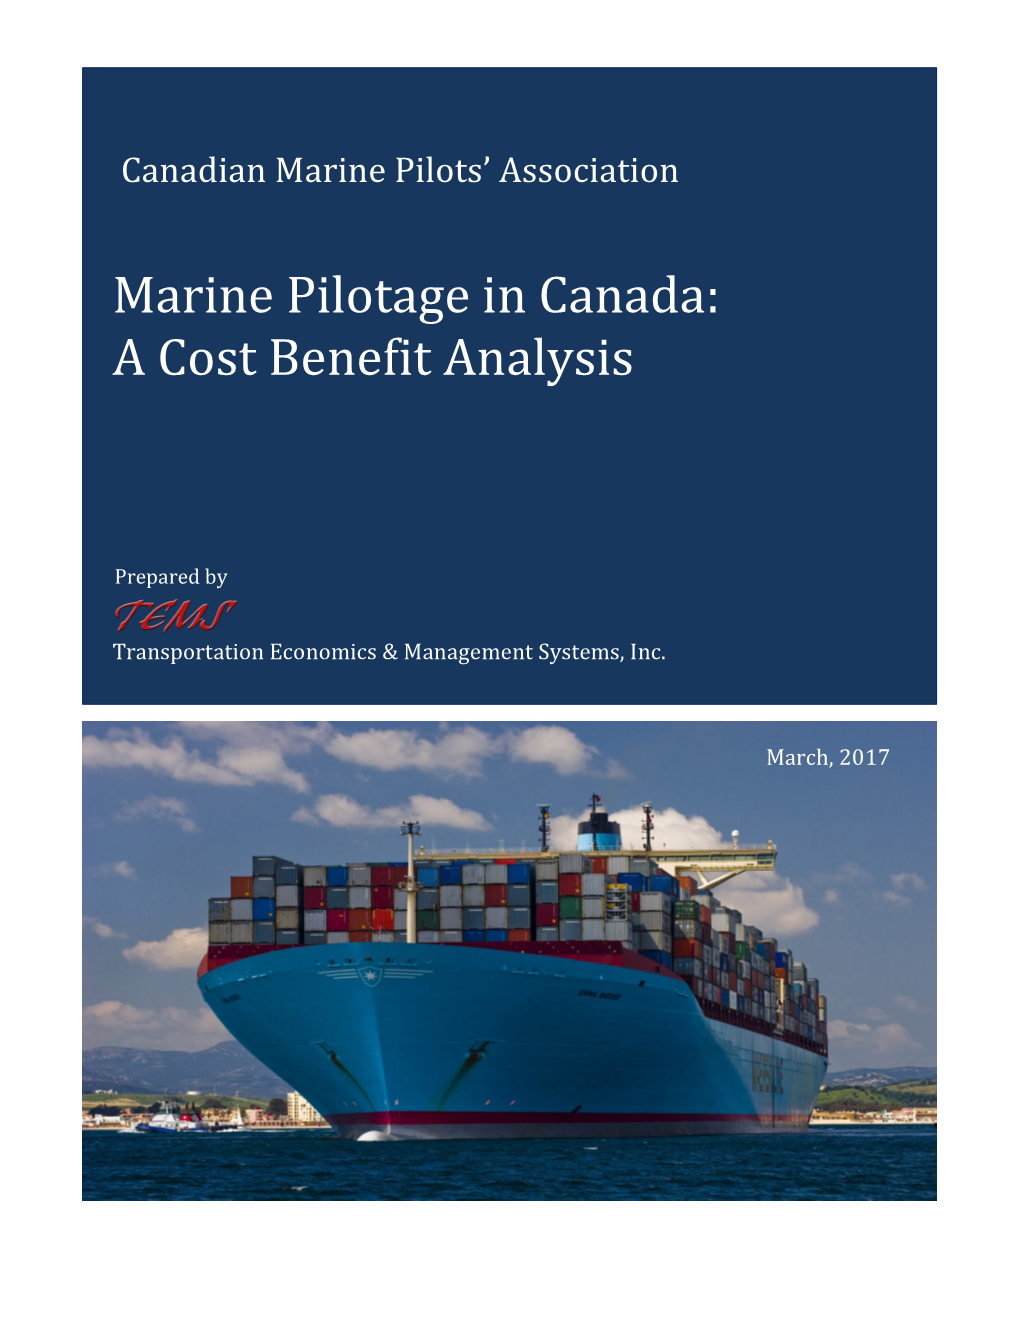 Marine Pilotage in Canada: a Cost Benefit Analysis